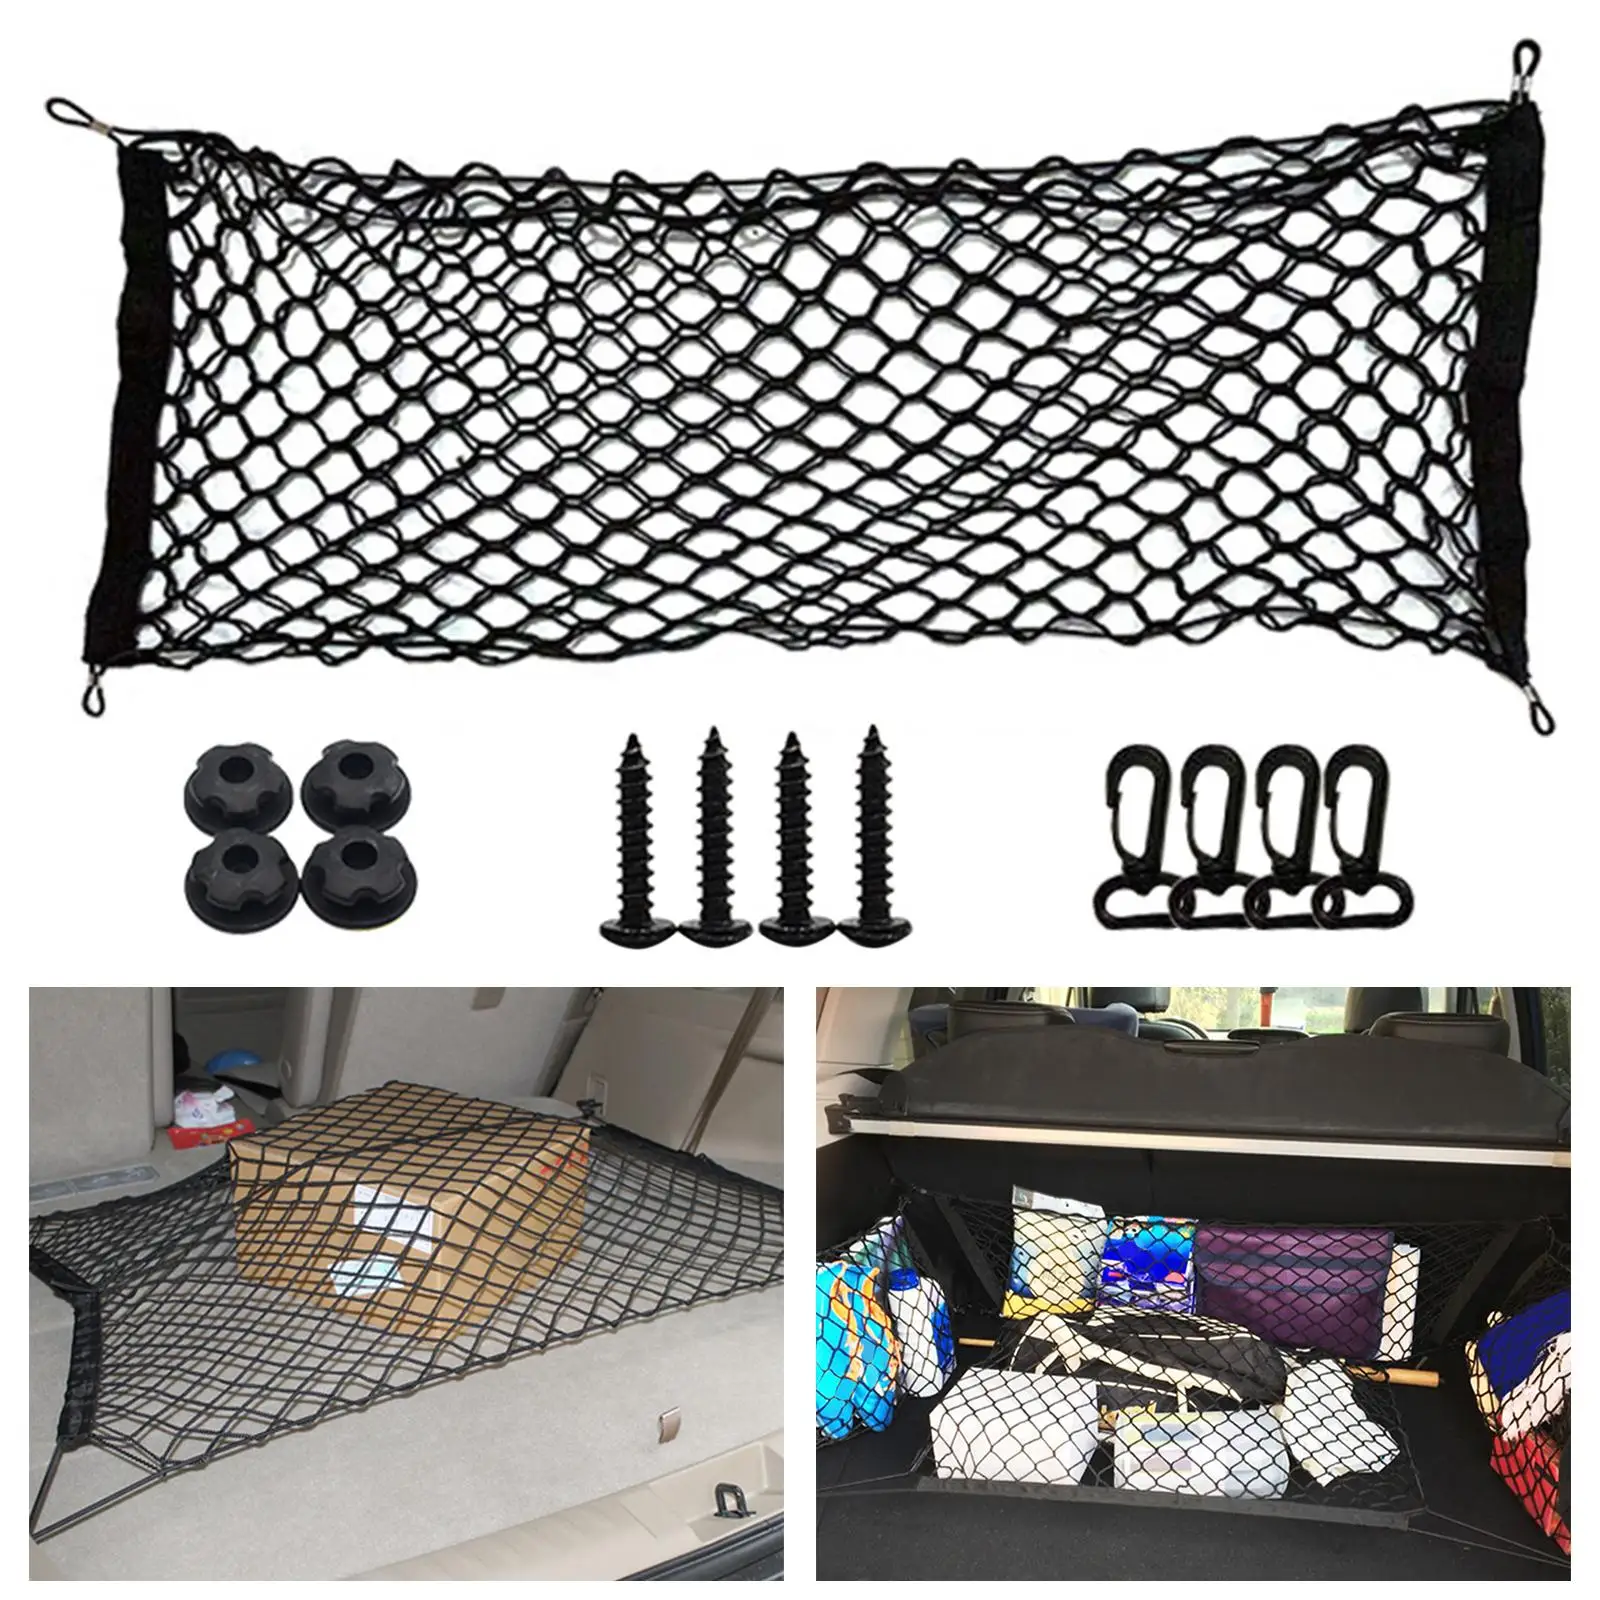 Elastic Net Mesh Nylon Holder Cargo Envelope Style Car Boot Trunk Stretchable Universal Organizer Accs Fits for Truck Vehicle